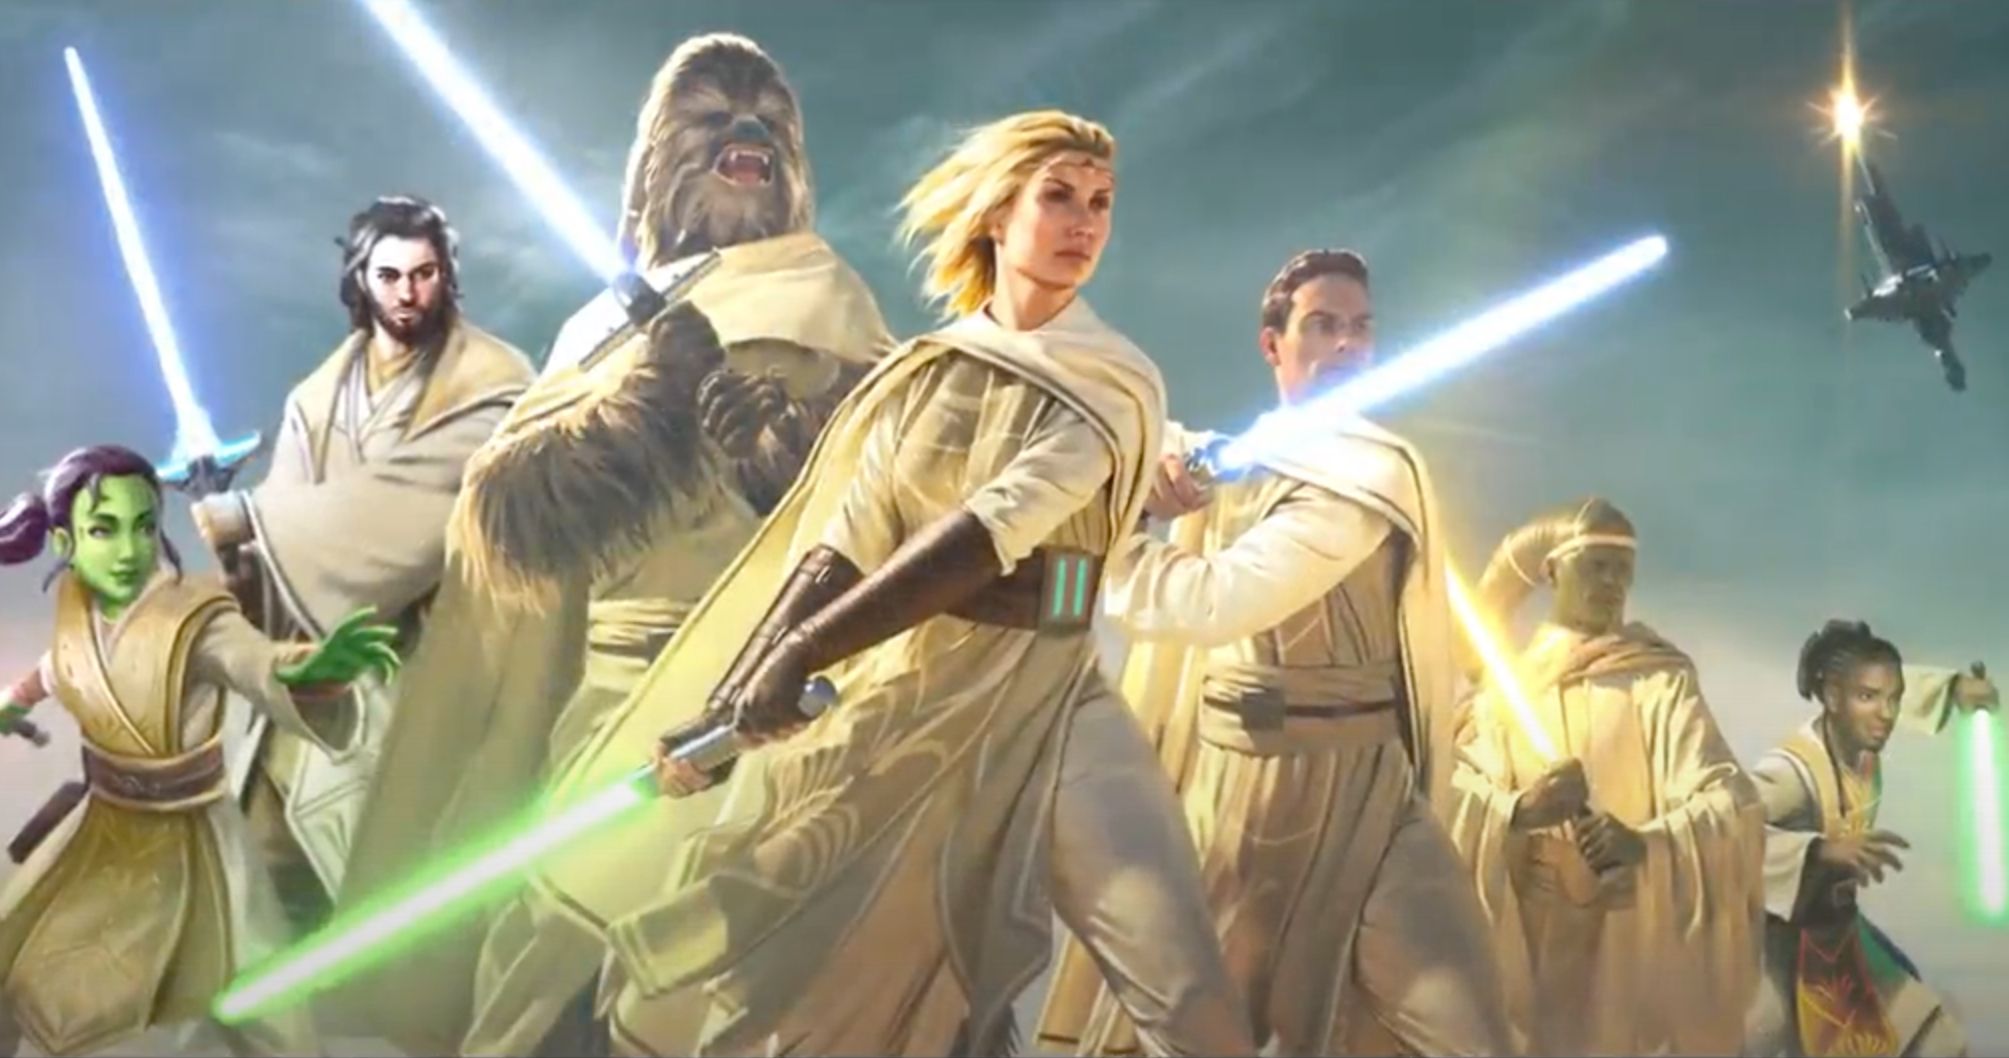 The High Republic Launch Trailer Ushers in a New Era of Star Wars Storytelling